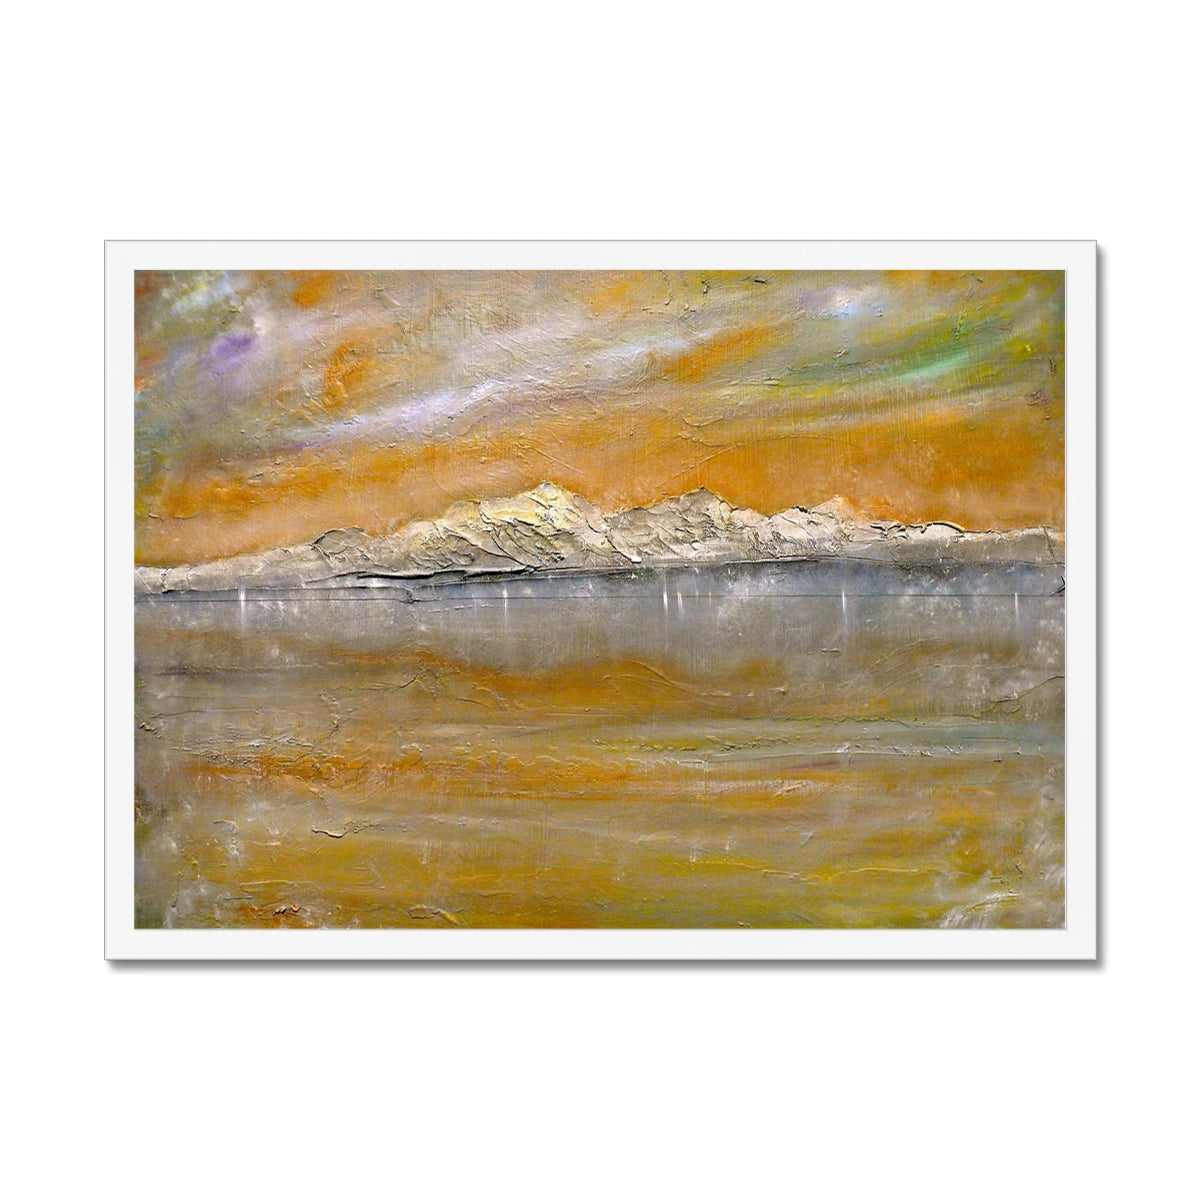 Arran Snow Painting | Framed Prints From Scotland-Framed Prints-Arran Art Gallery-A2 Landscape-White Frame-Paintings, Prints, Homeware, Art Gifts From Scotland By Scottish Artist Kevin Hunter